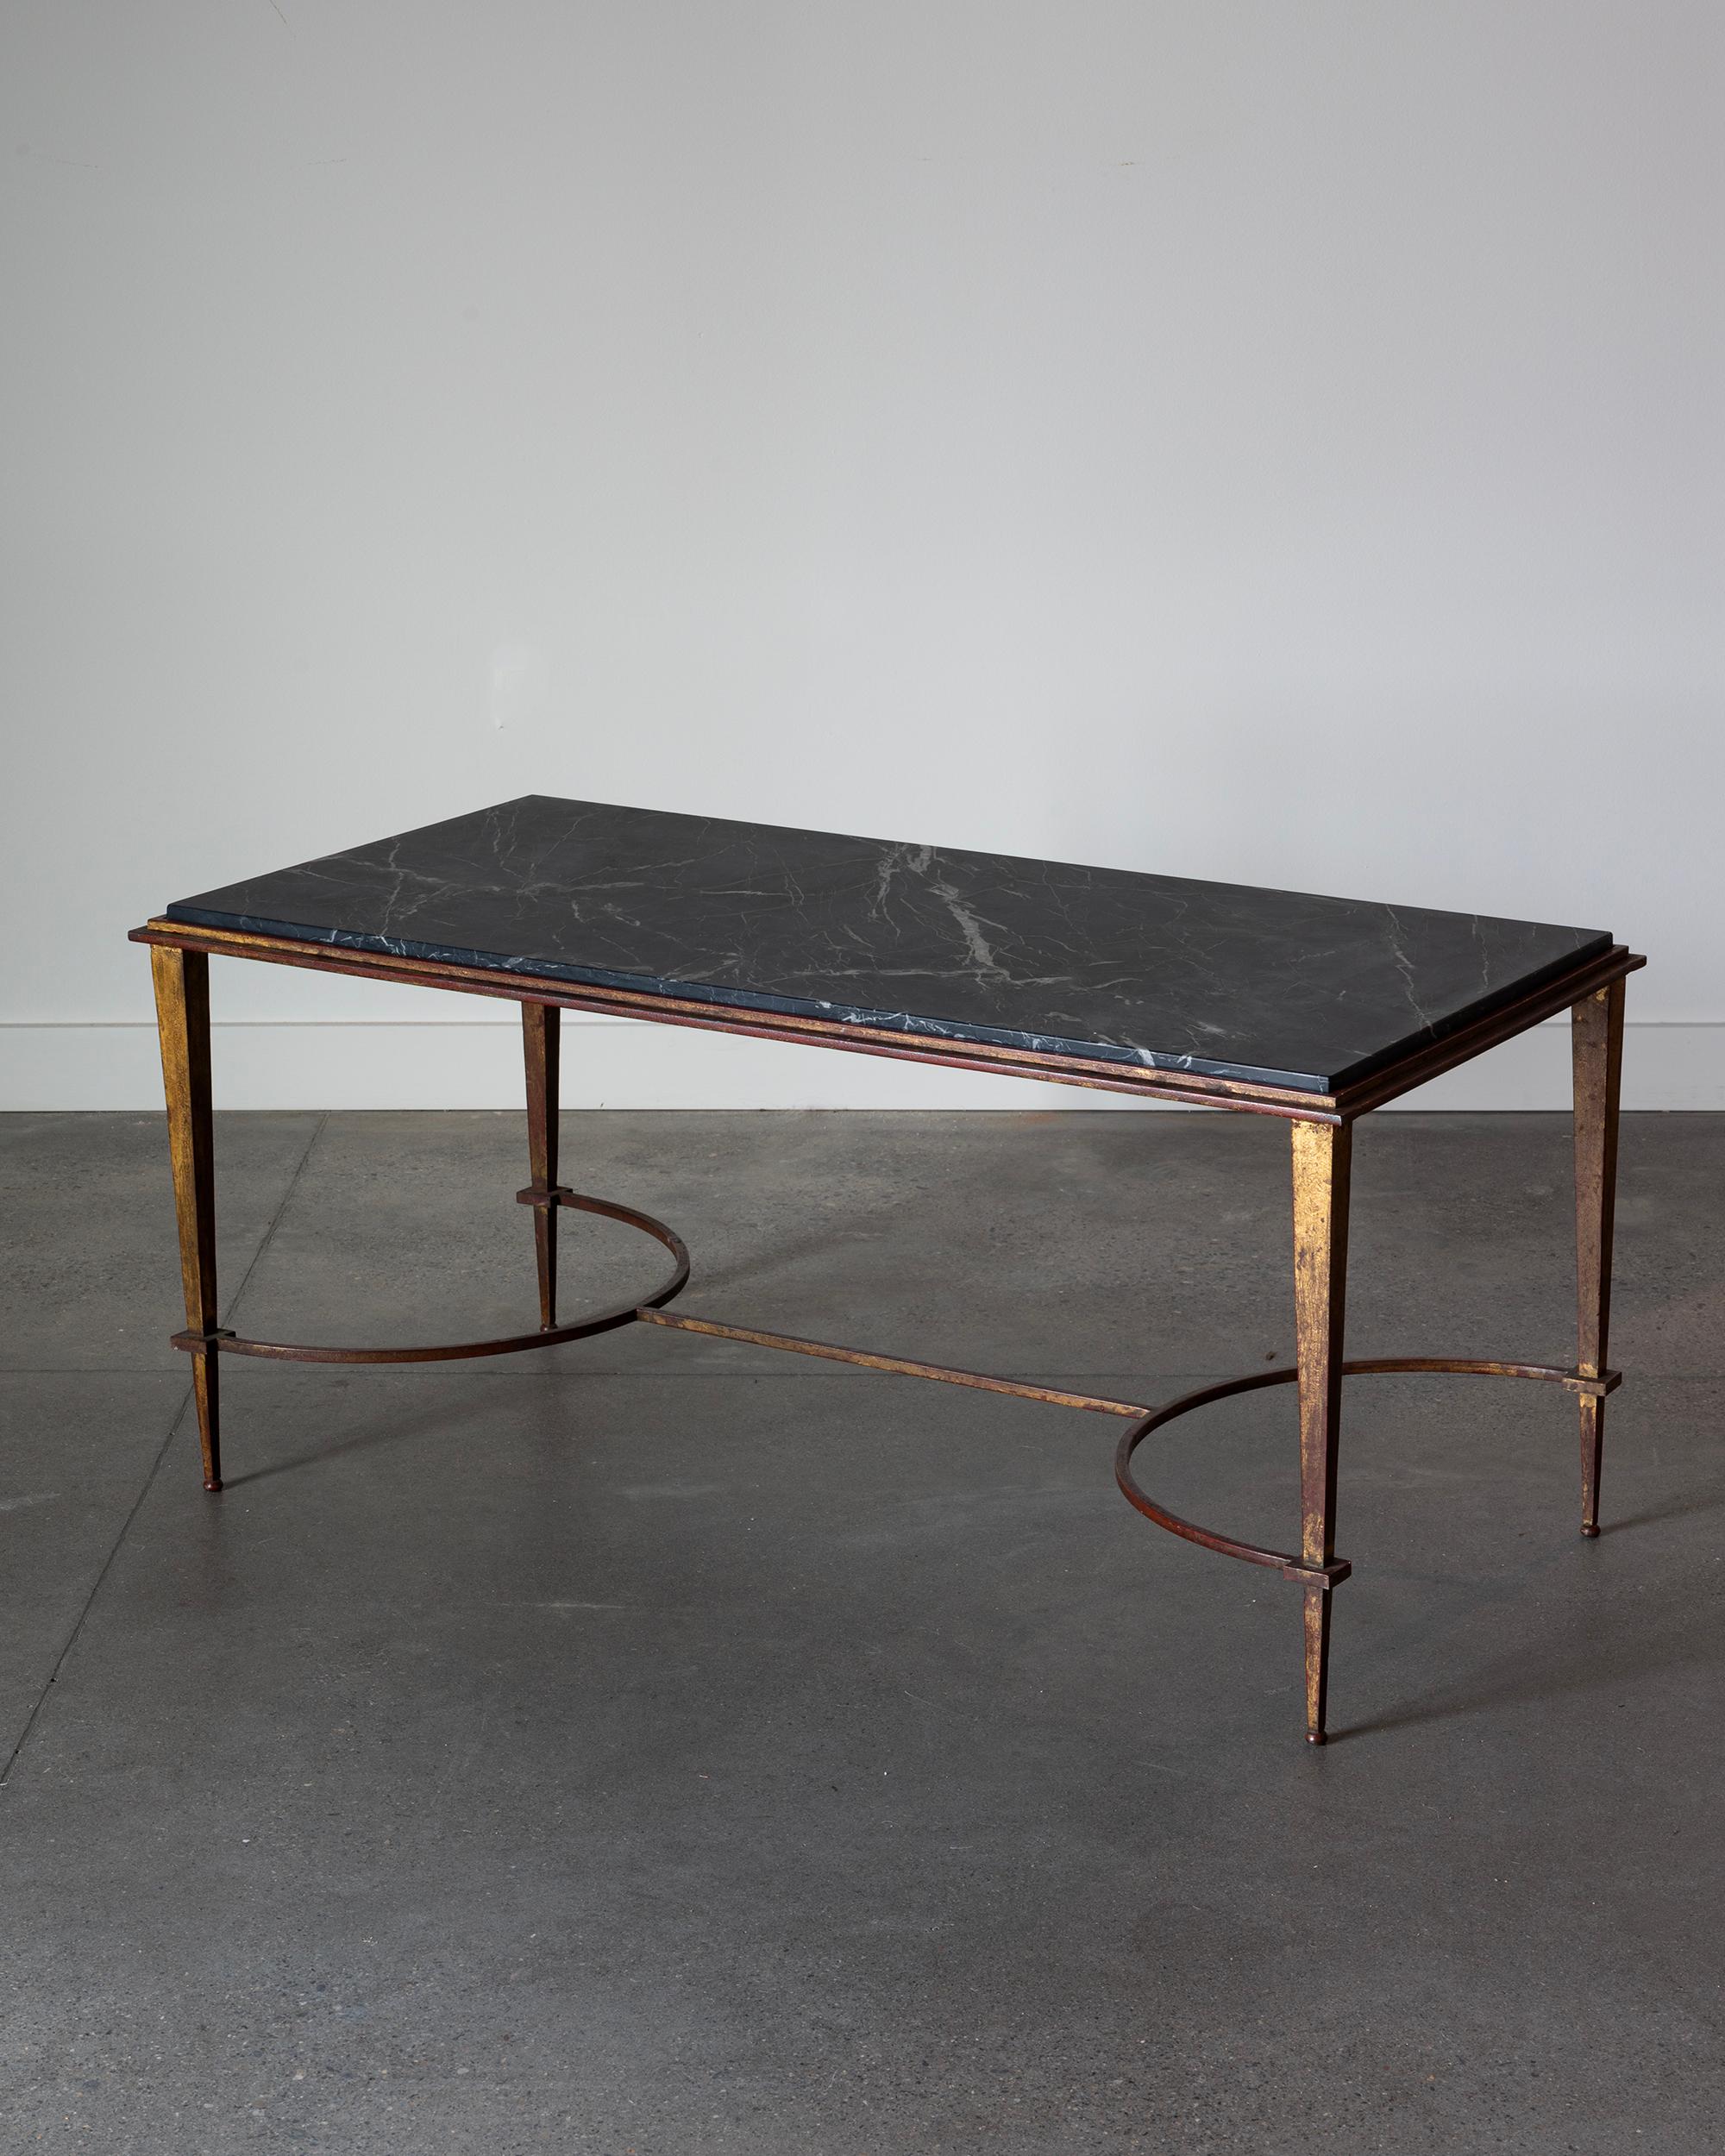 Fine gold leaf patinated wrought iron & marble coffee table by Maison Ramsay. Ca 1950 - 60s France. 